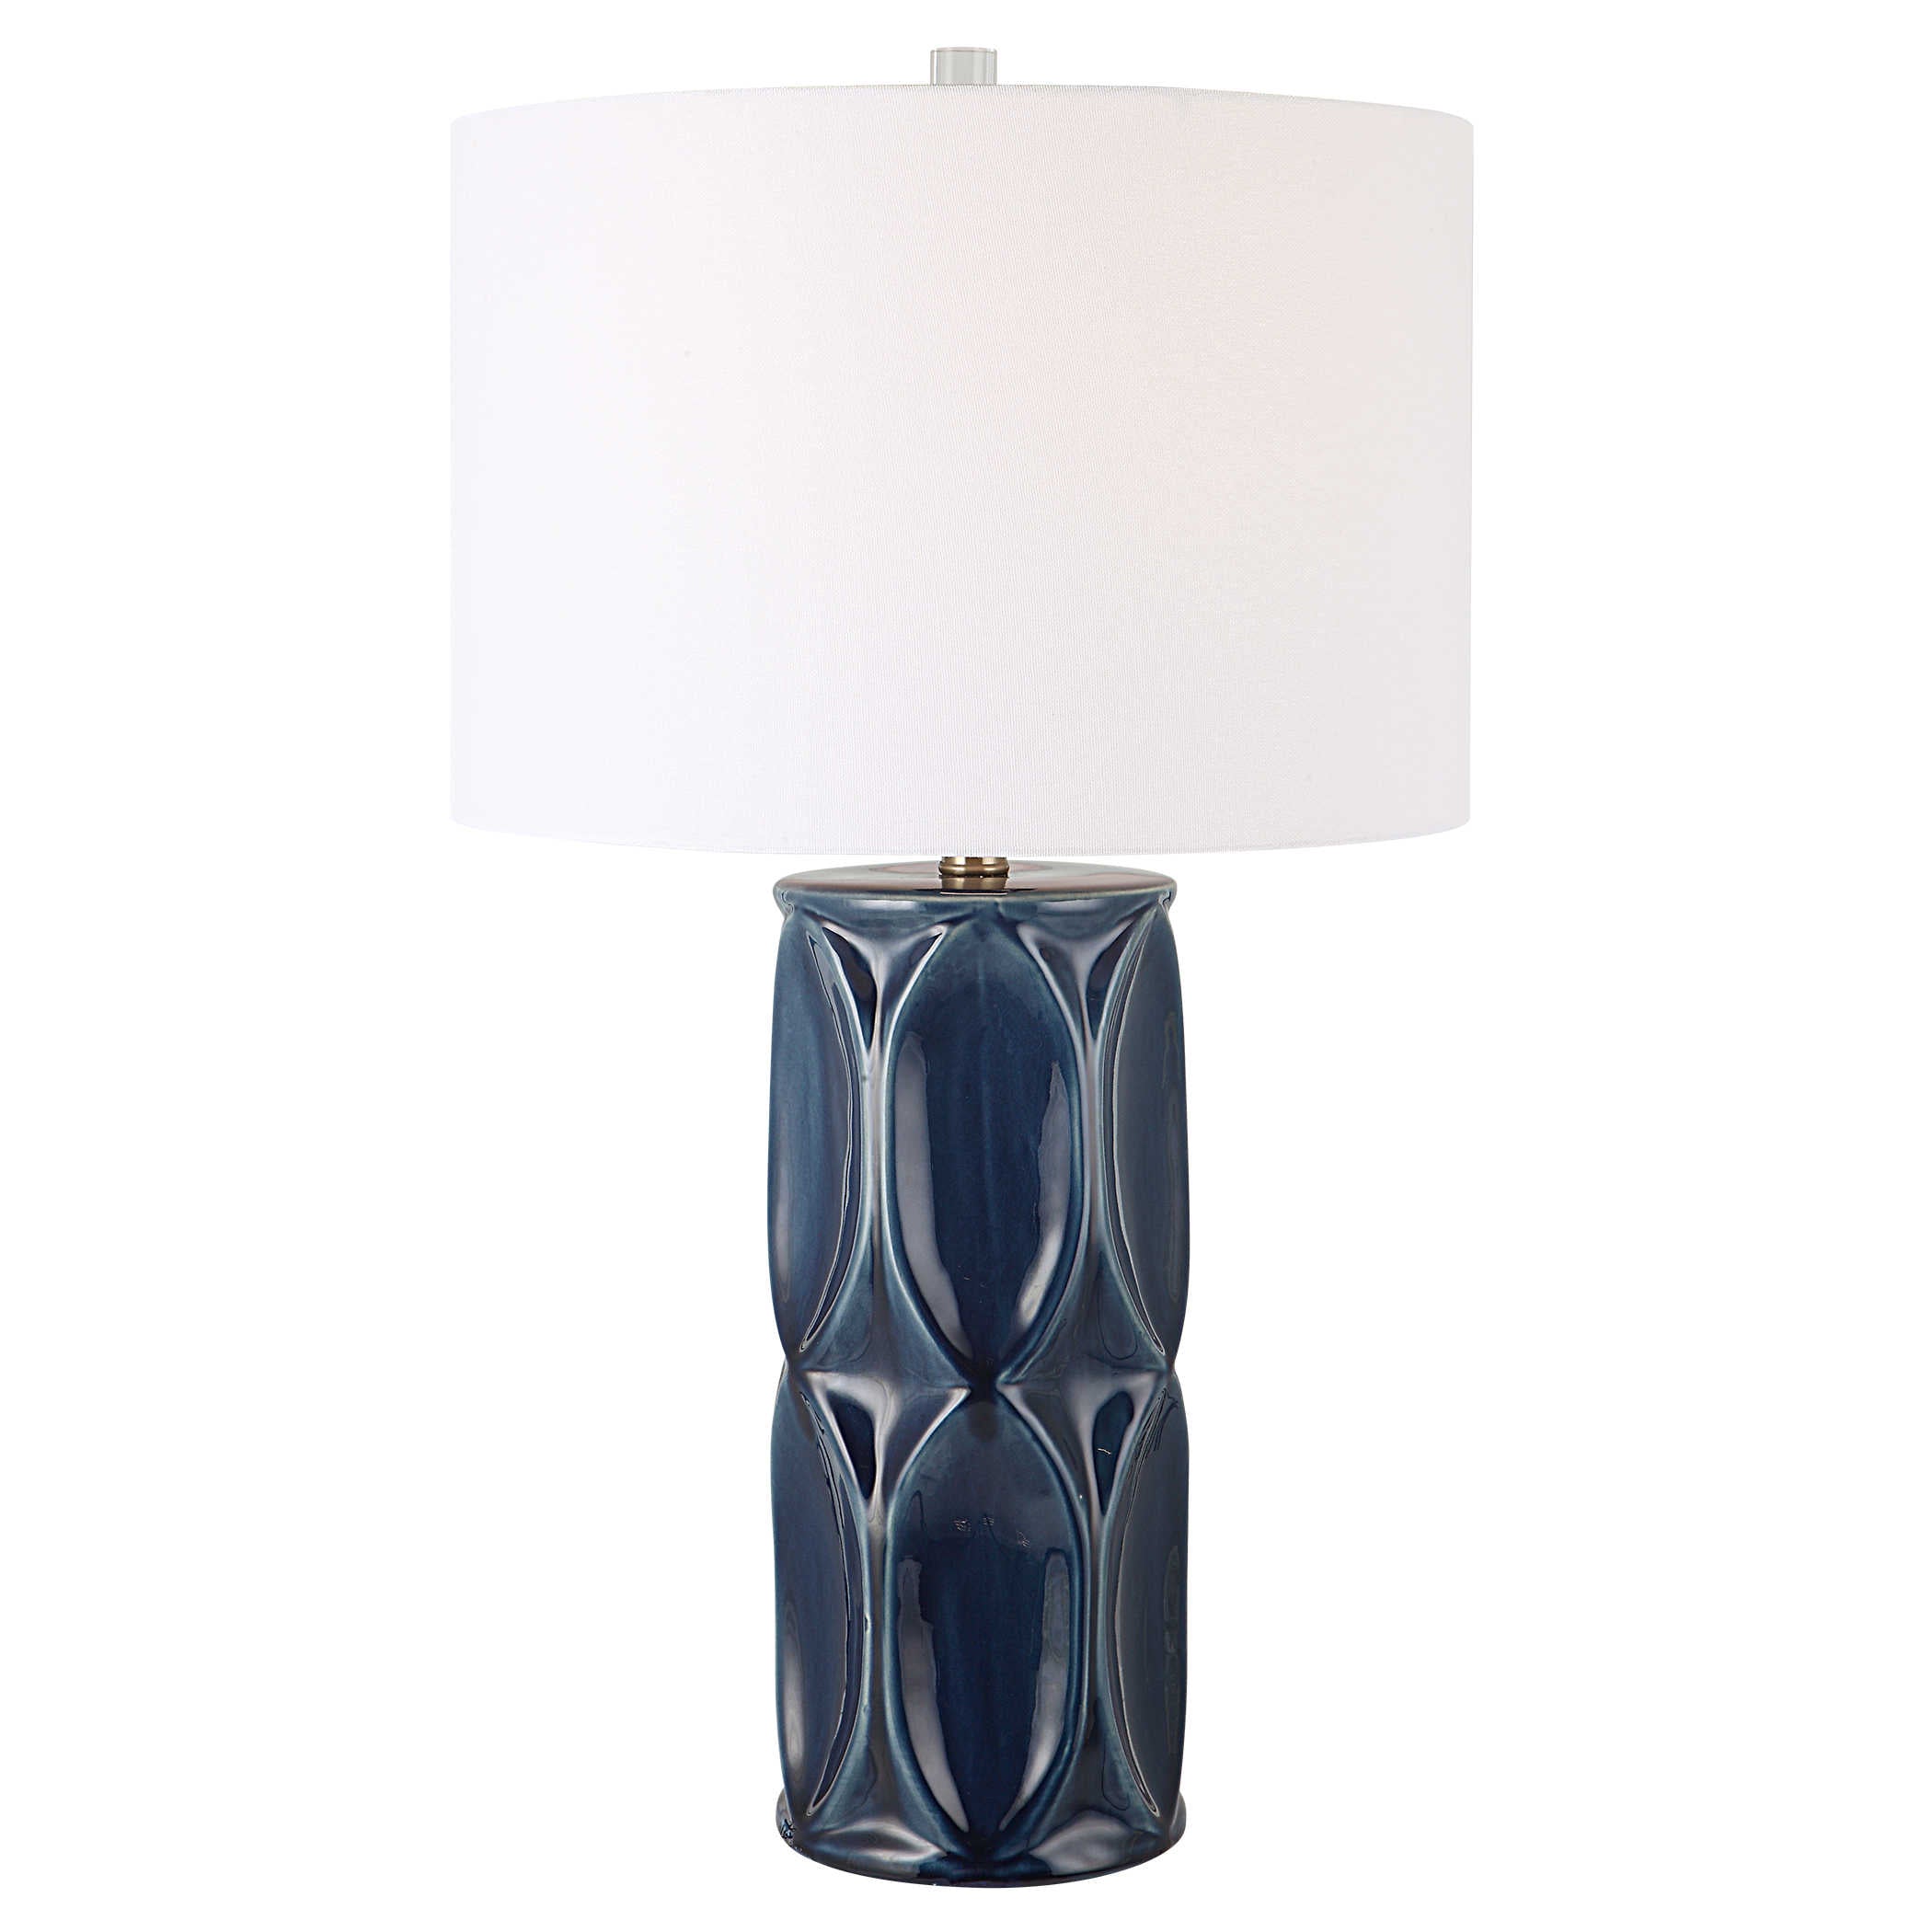 Uttermost Sinclair Blue Table Lamp Blue Table Lamp Uttermost CERAMIC, METAL, FABRIC  